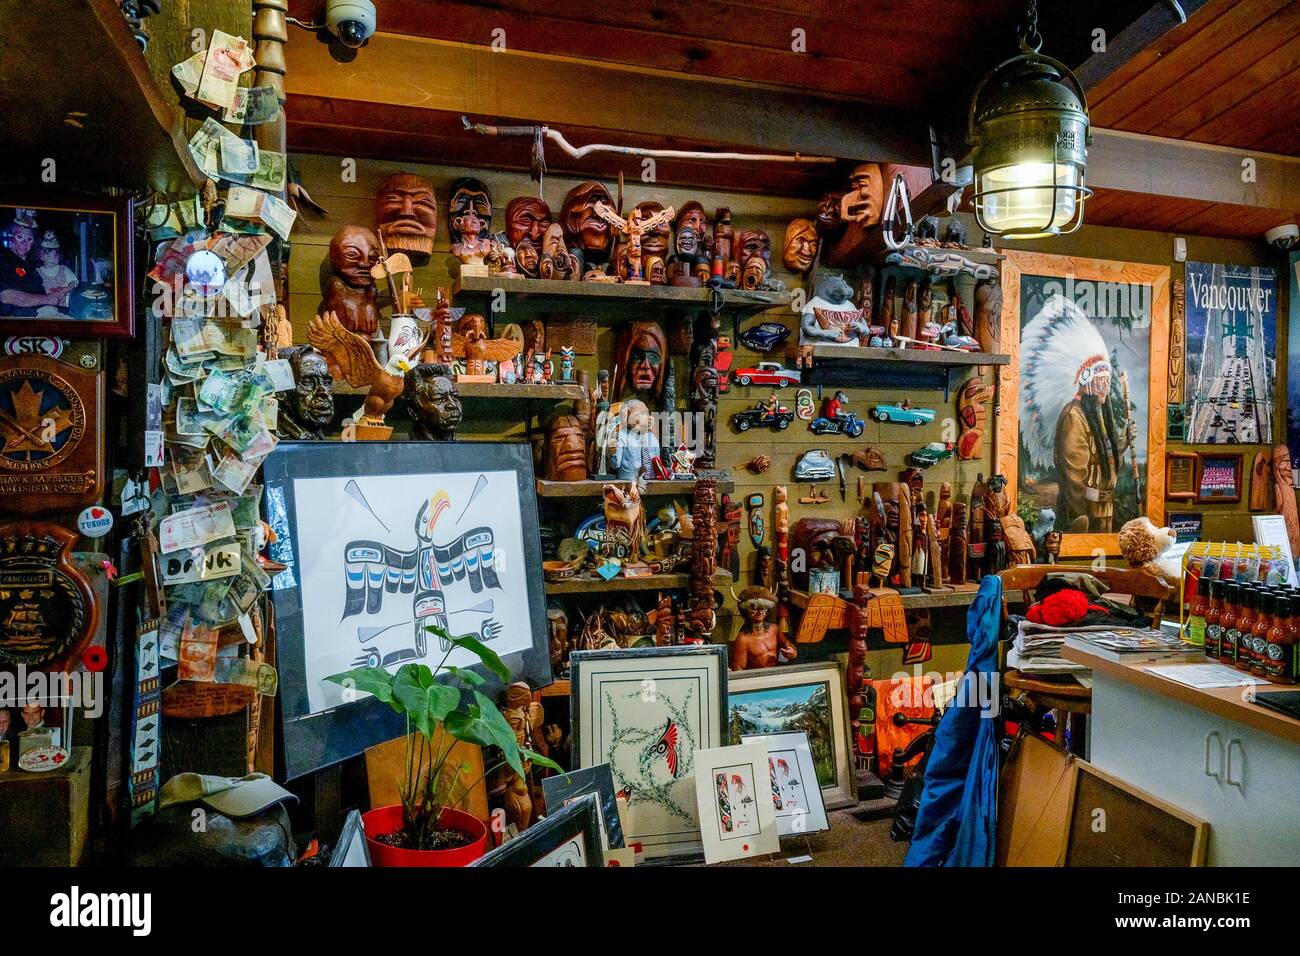 First Nations wood carvings, Tomahawk, Barbeque Restaurant, North  Vancouver, British Columbia, Canada Stock Photo - Alamy